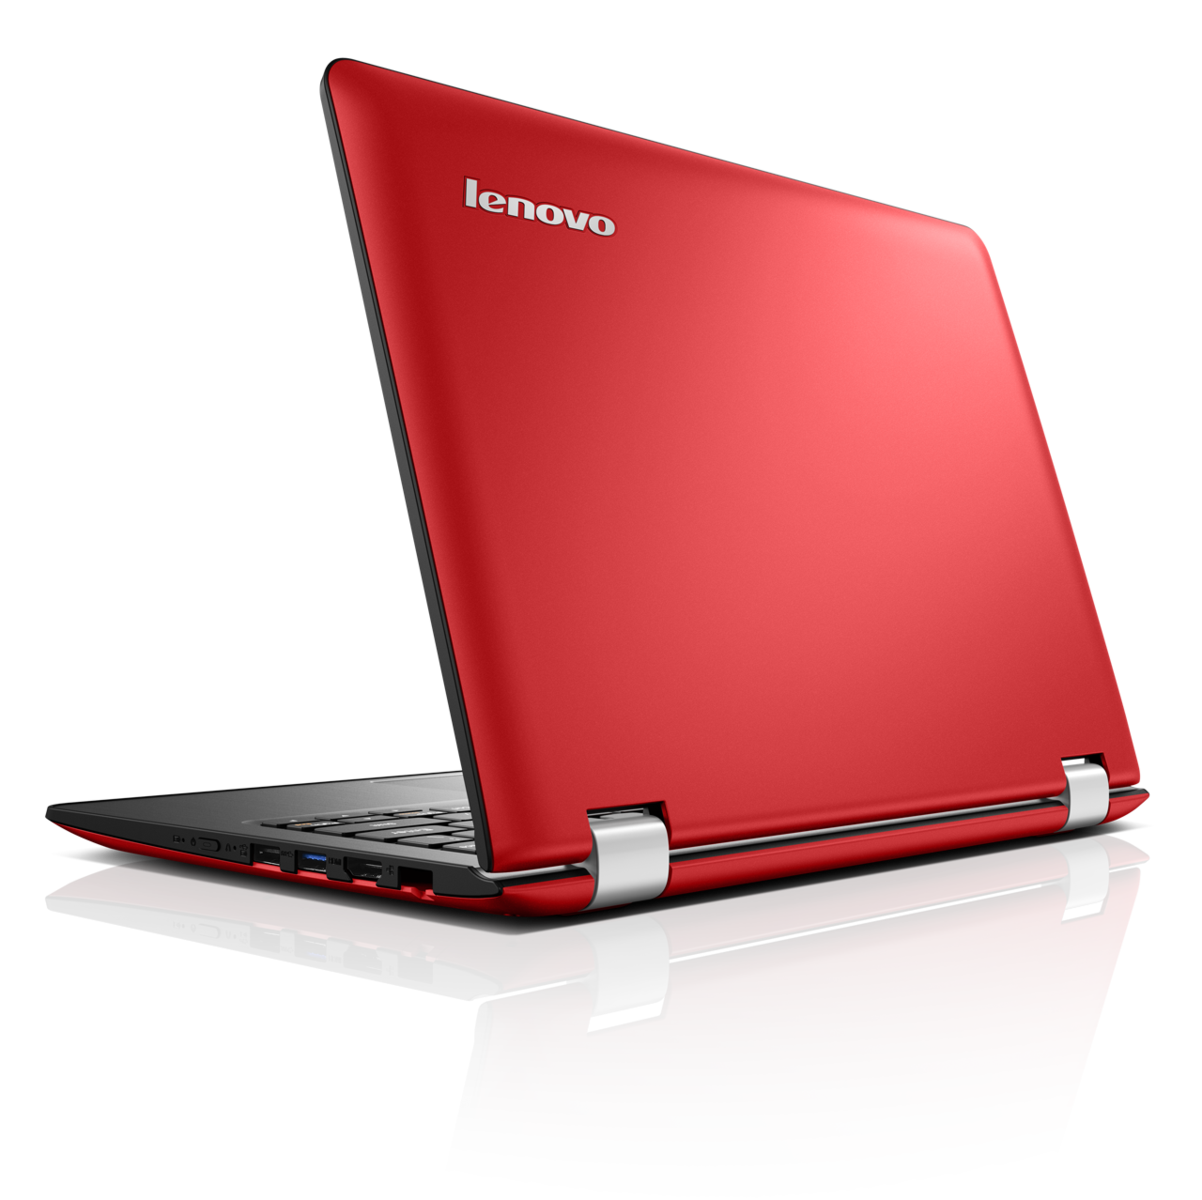 Lenovo Ideapad 300 and 300S series coming this October - NotebookCheck.net News